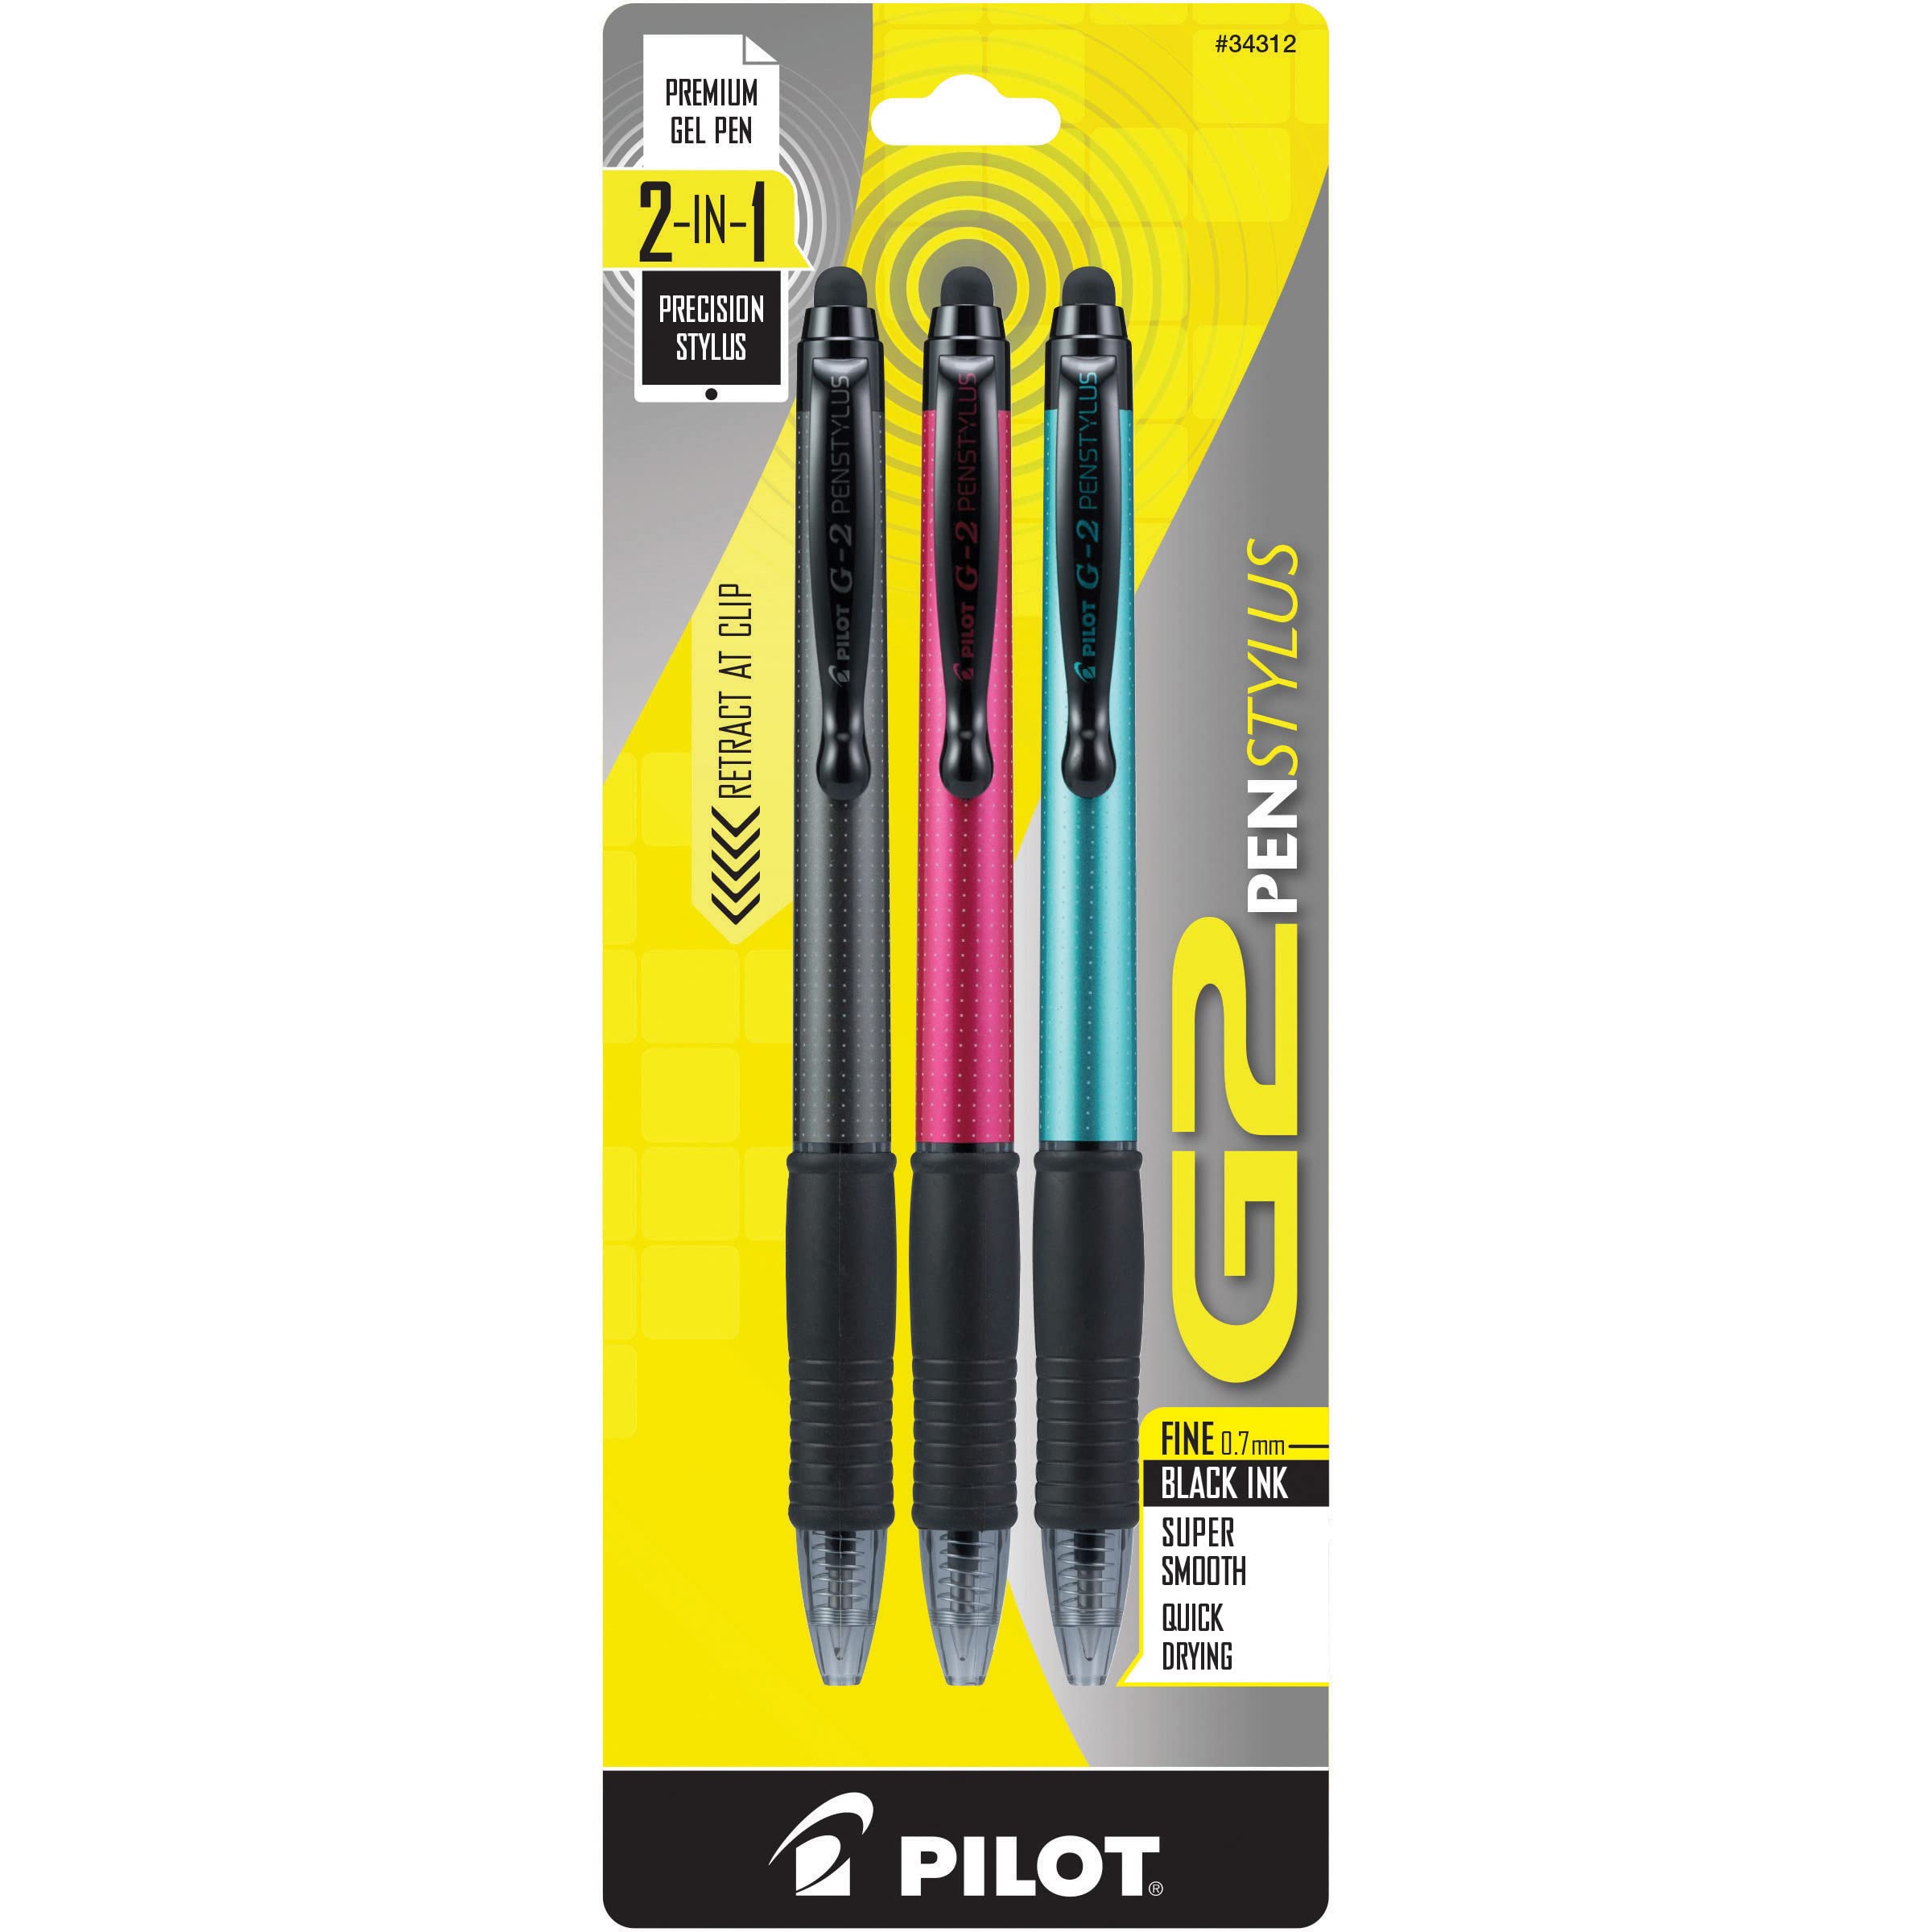 Pilot, G2 Pen Stylus, Fine Point 0.7 mm, Pack of 3, Black Ink, Gray/Red/Turquoise Barrel